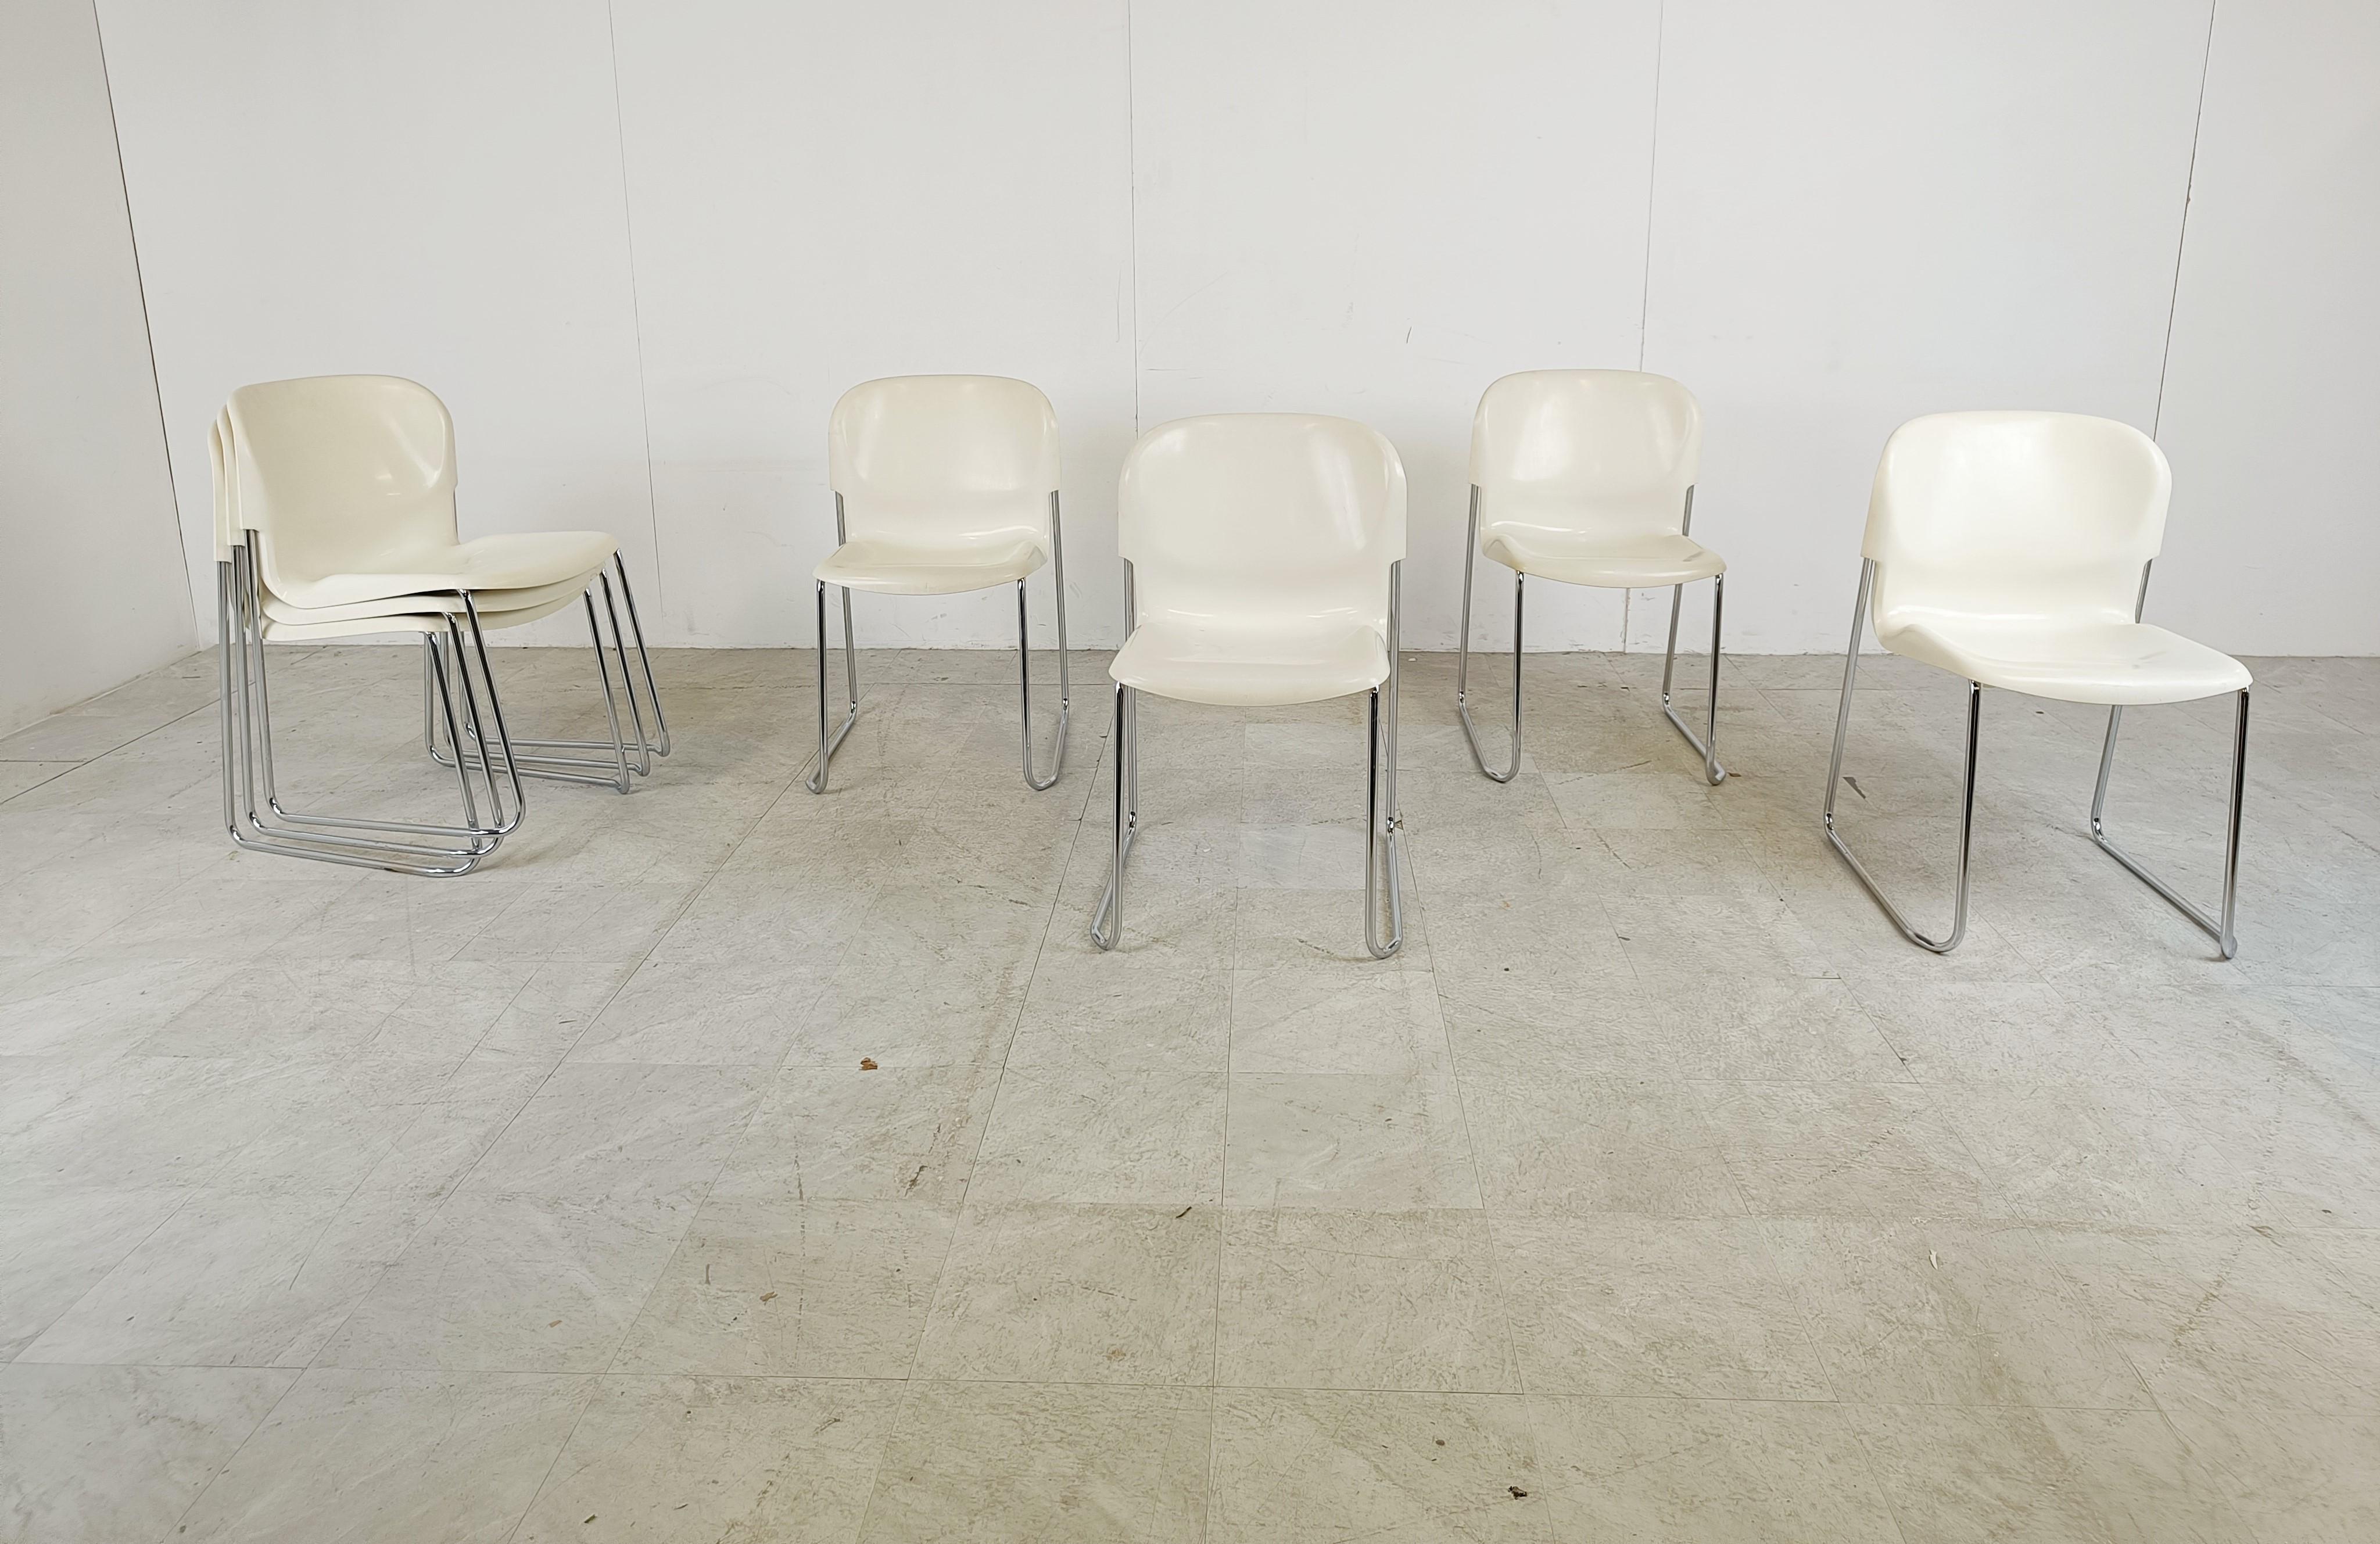 Space Age Vintage Drabert SM400 stacking chairs by Gerd Lange, 1980s For Sale